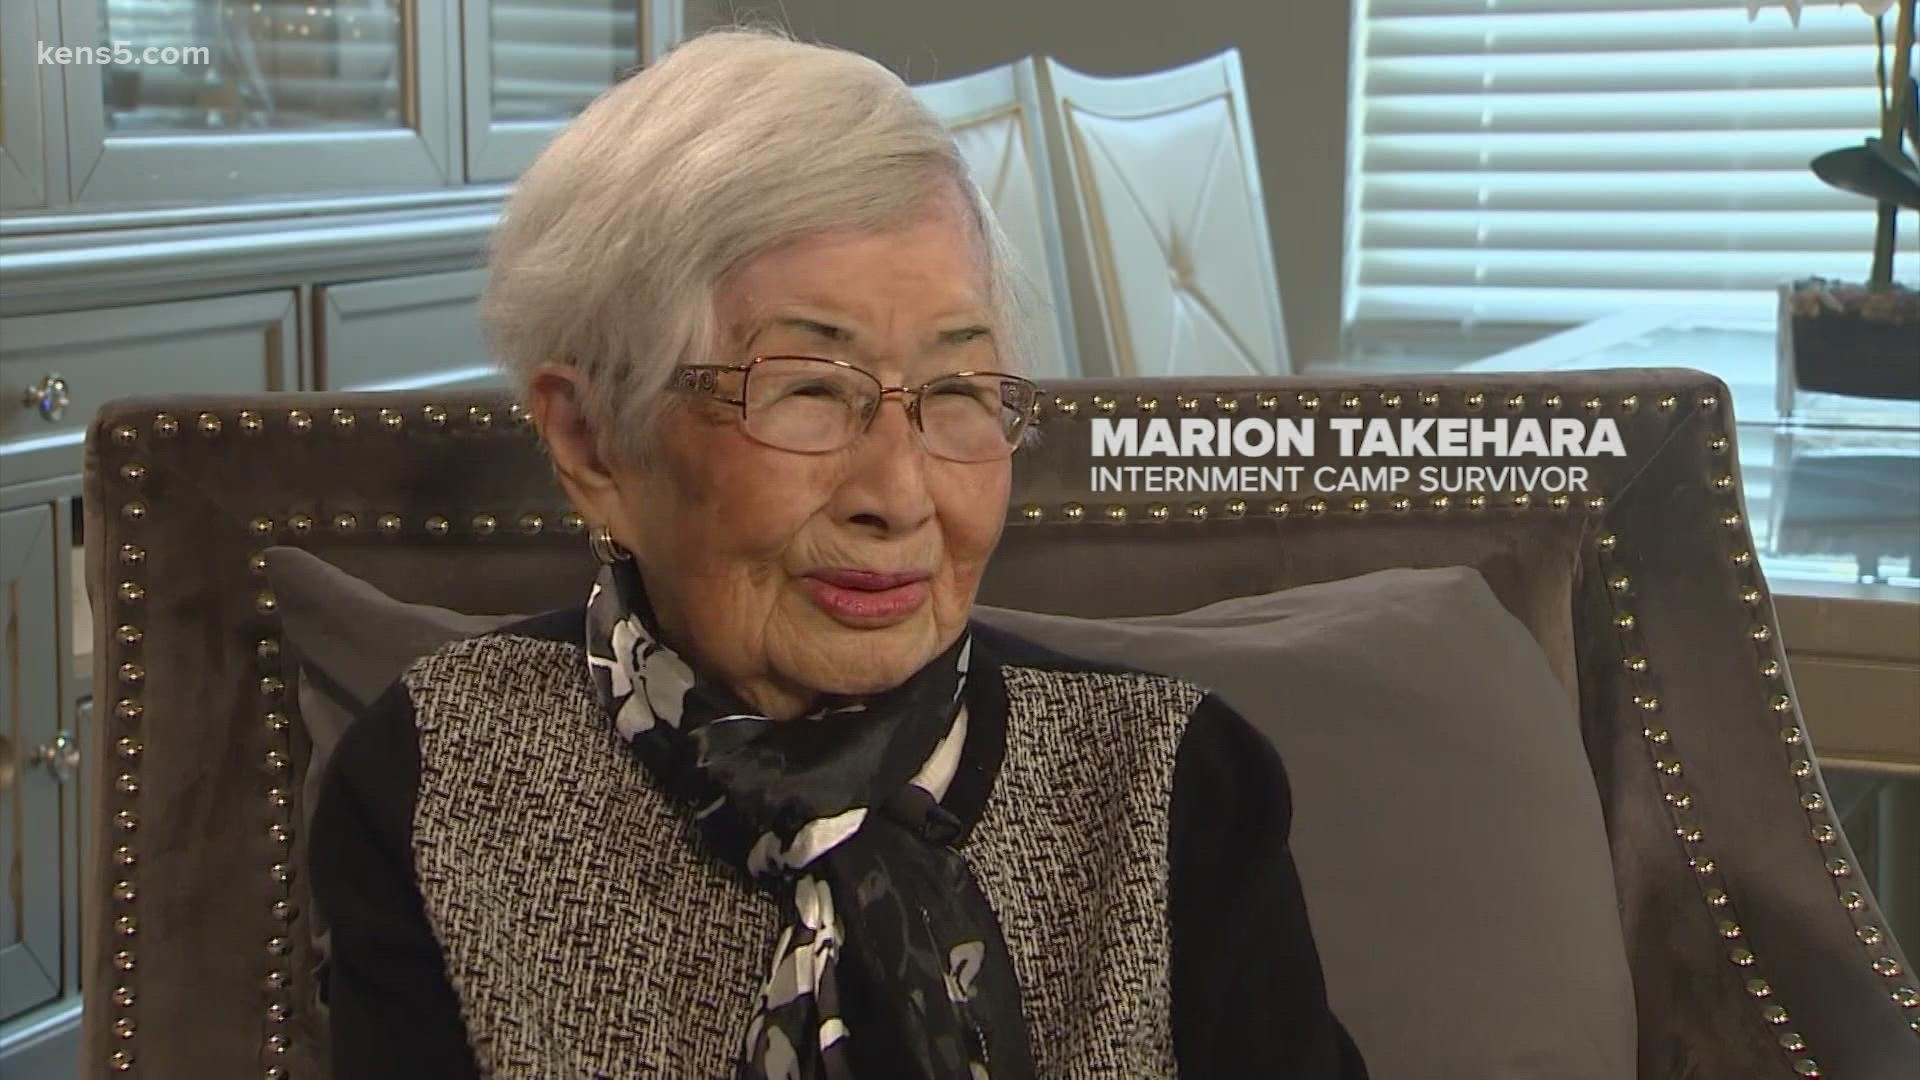 After Pearl Harbor, the U.S. placed 120,000 Japanese Americans into internment camps. A survivor sits down to explain why that history should never be forgotten.